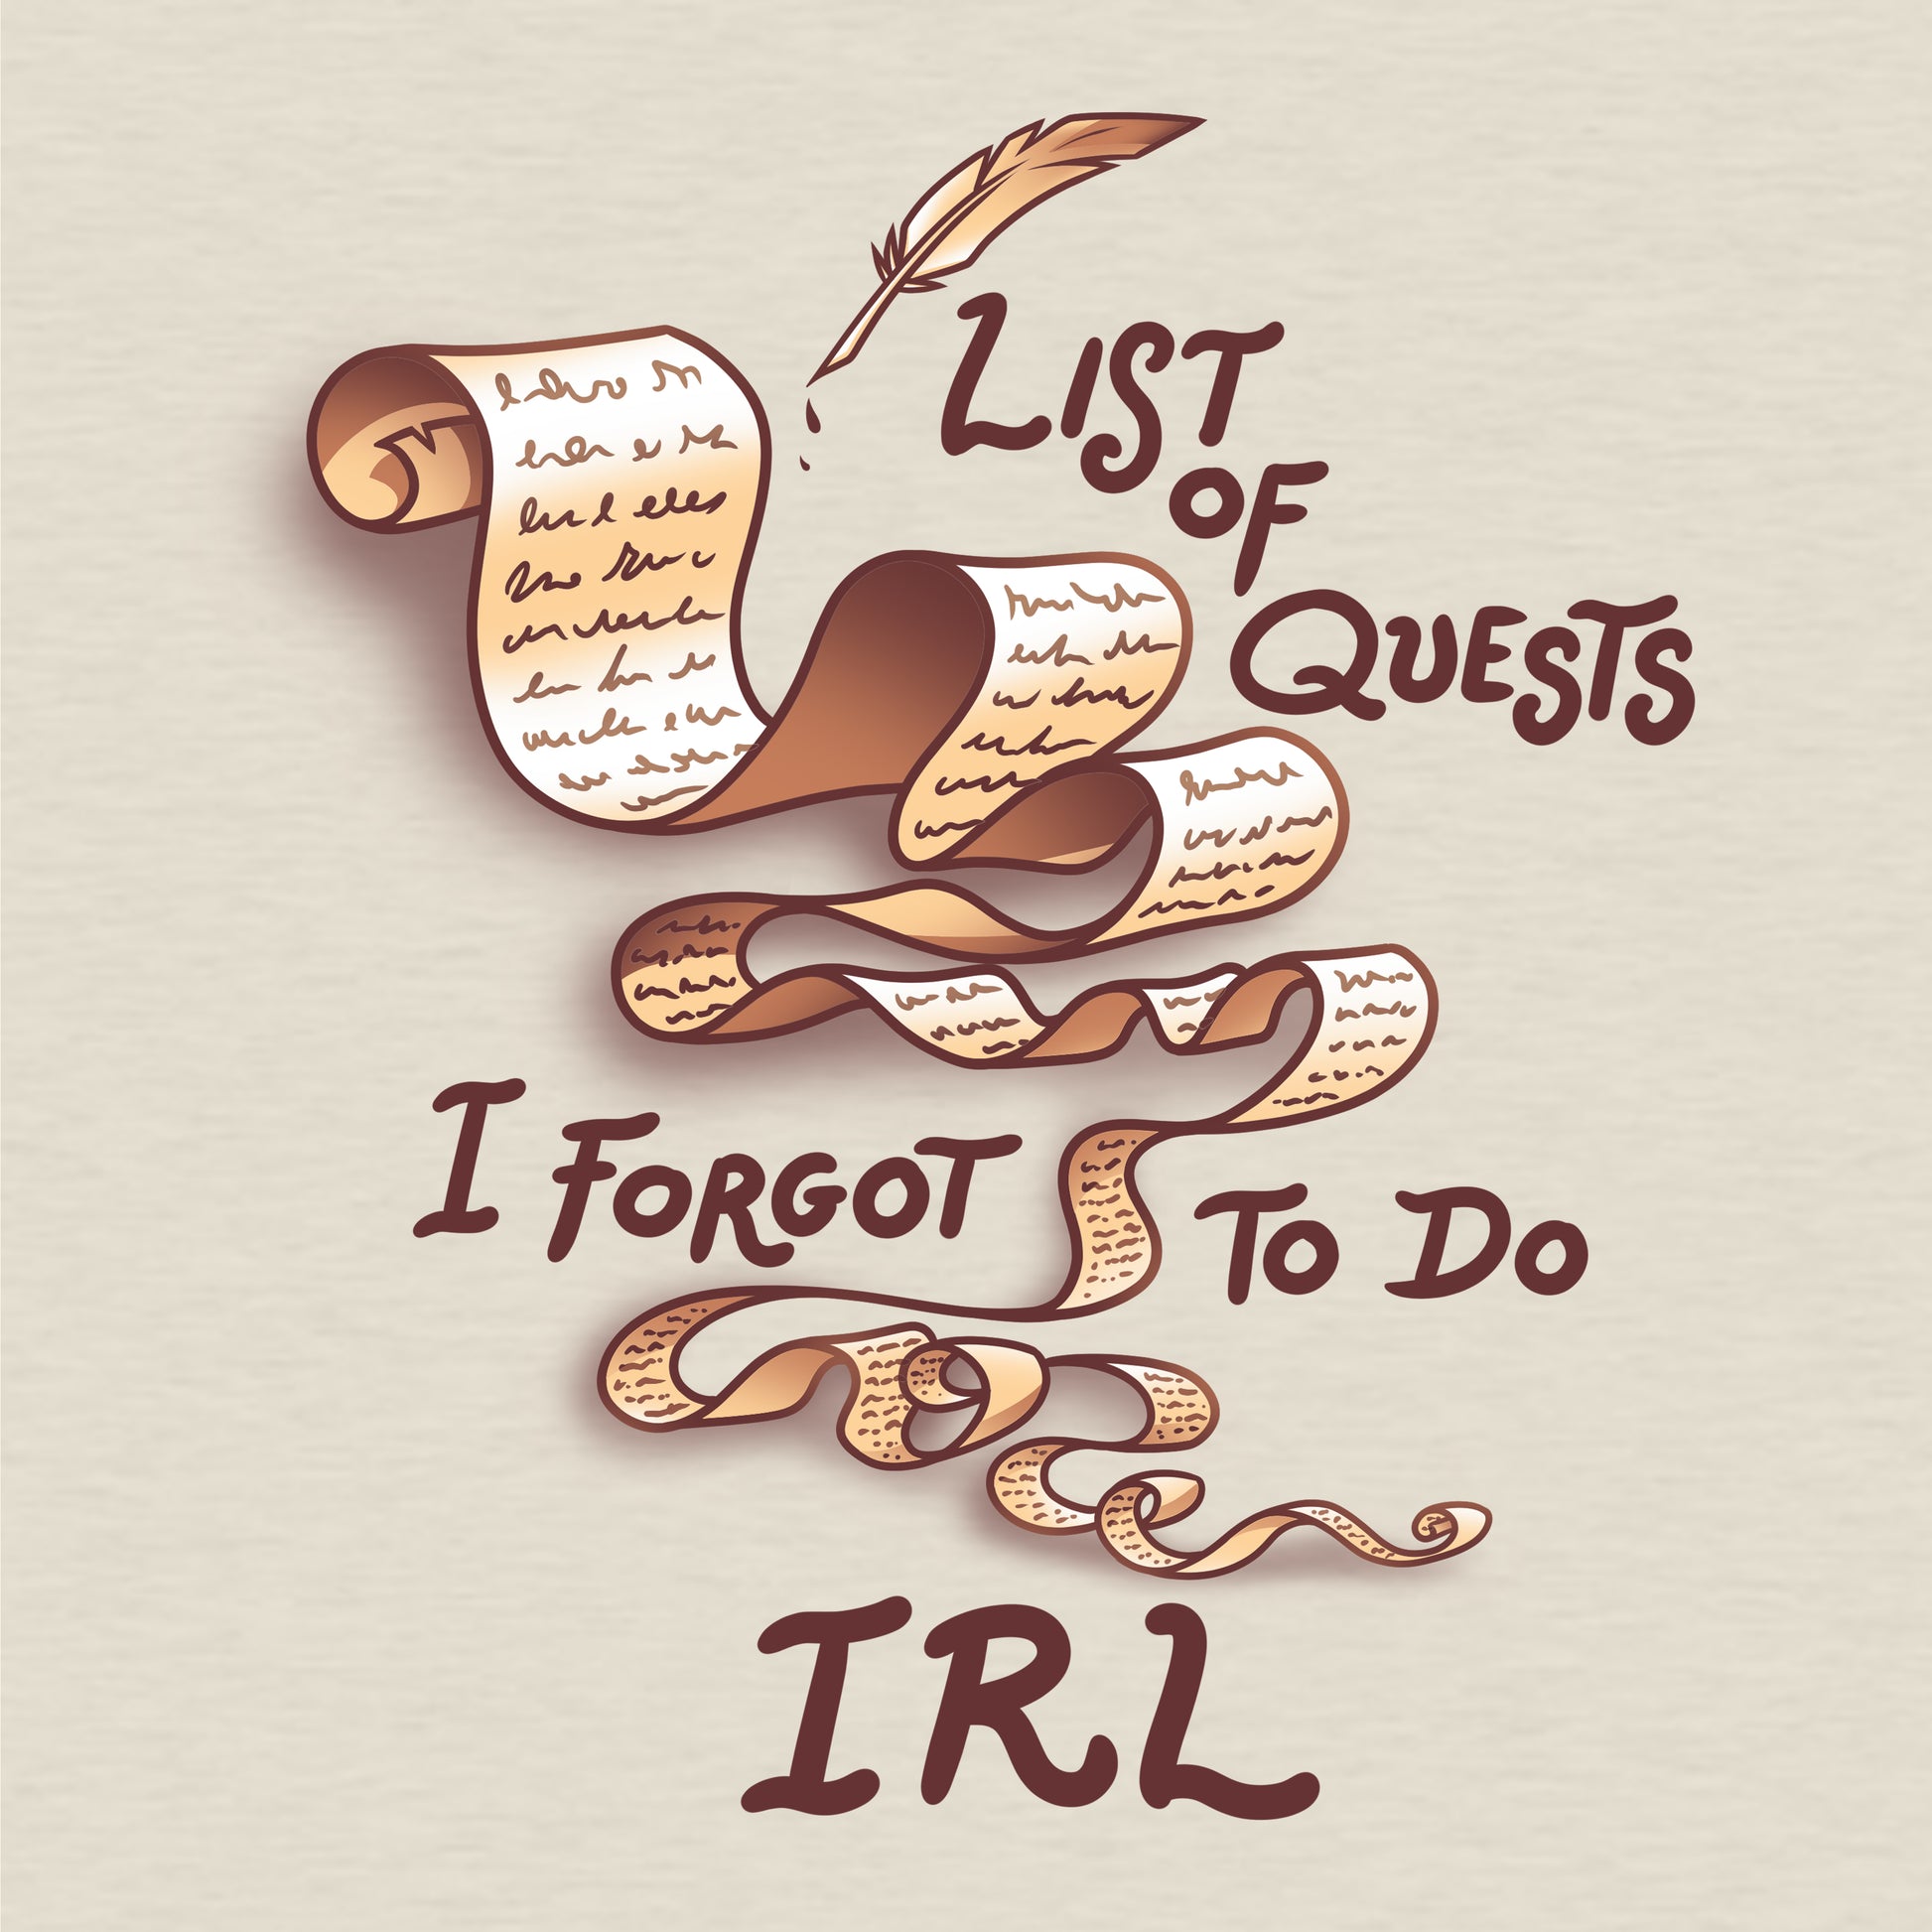 Forgotten Unfinished Quests for TeeTurtle comfort t-shirts.